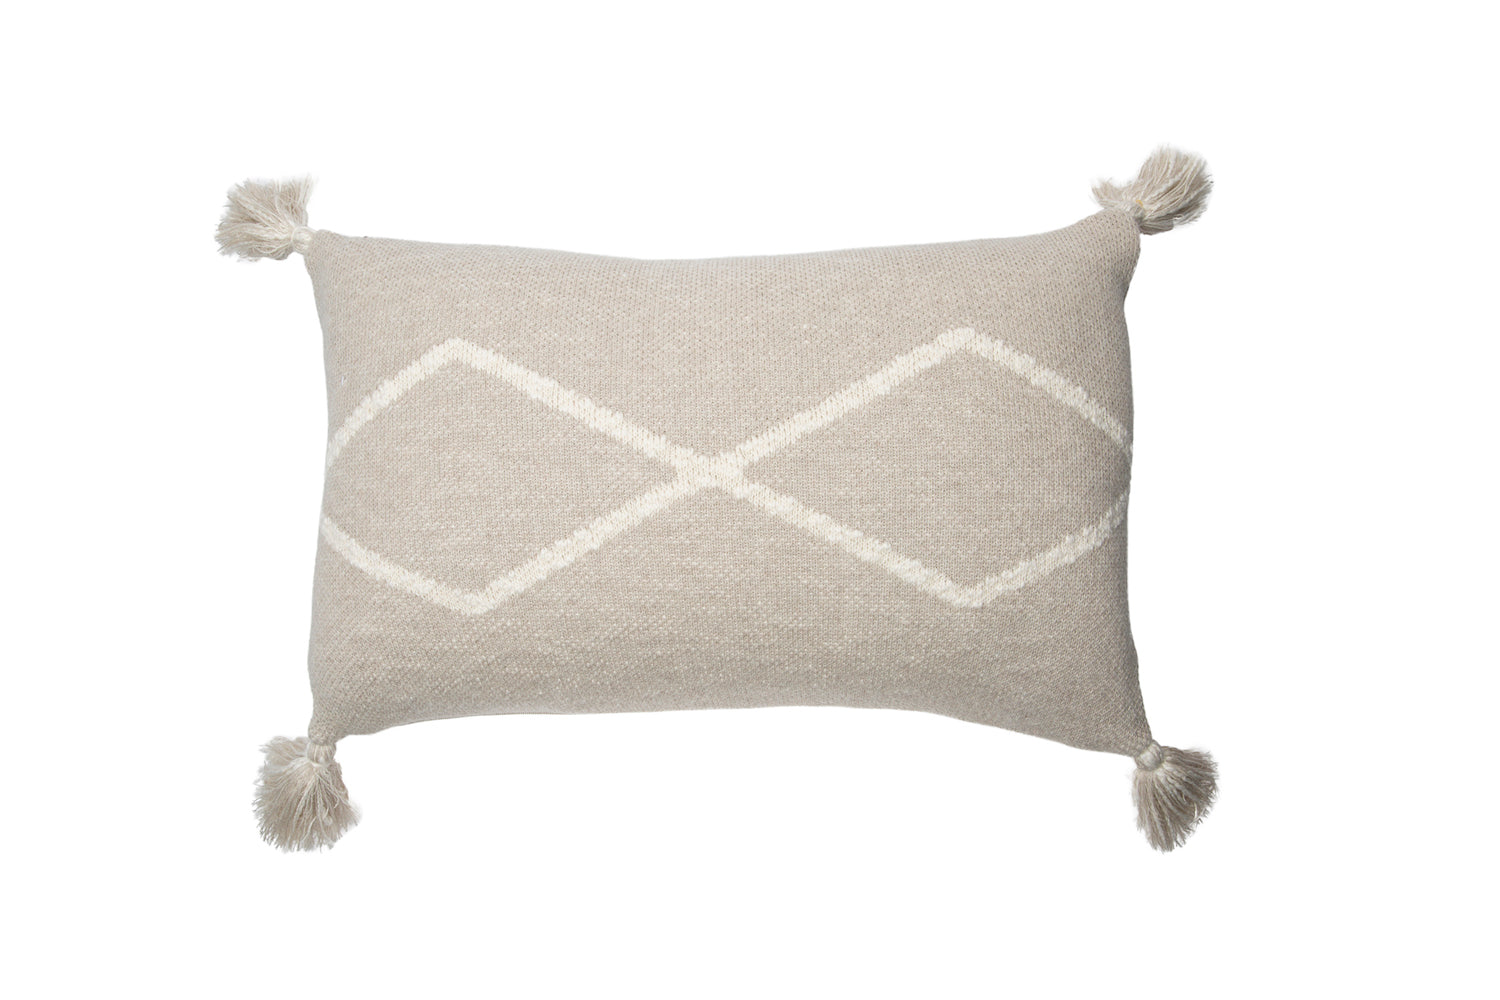 Knitted Cushion Oasis. A soft knitted cushion in natural with a rhombus pattern in cream and small corner tassels.